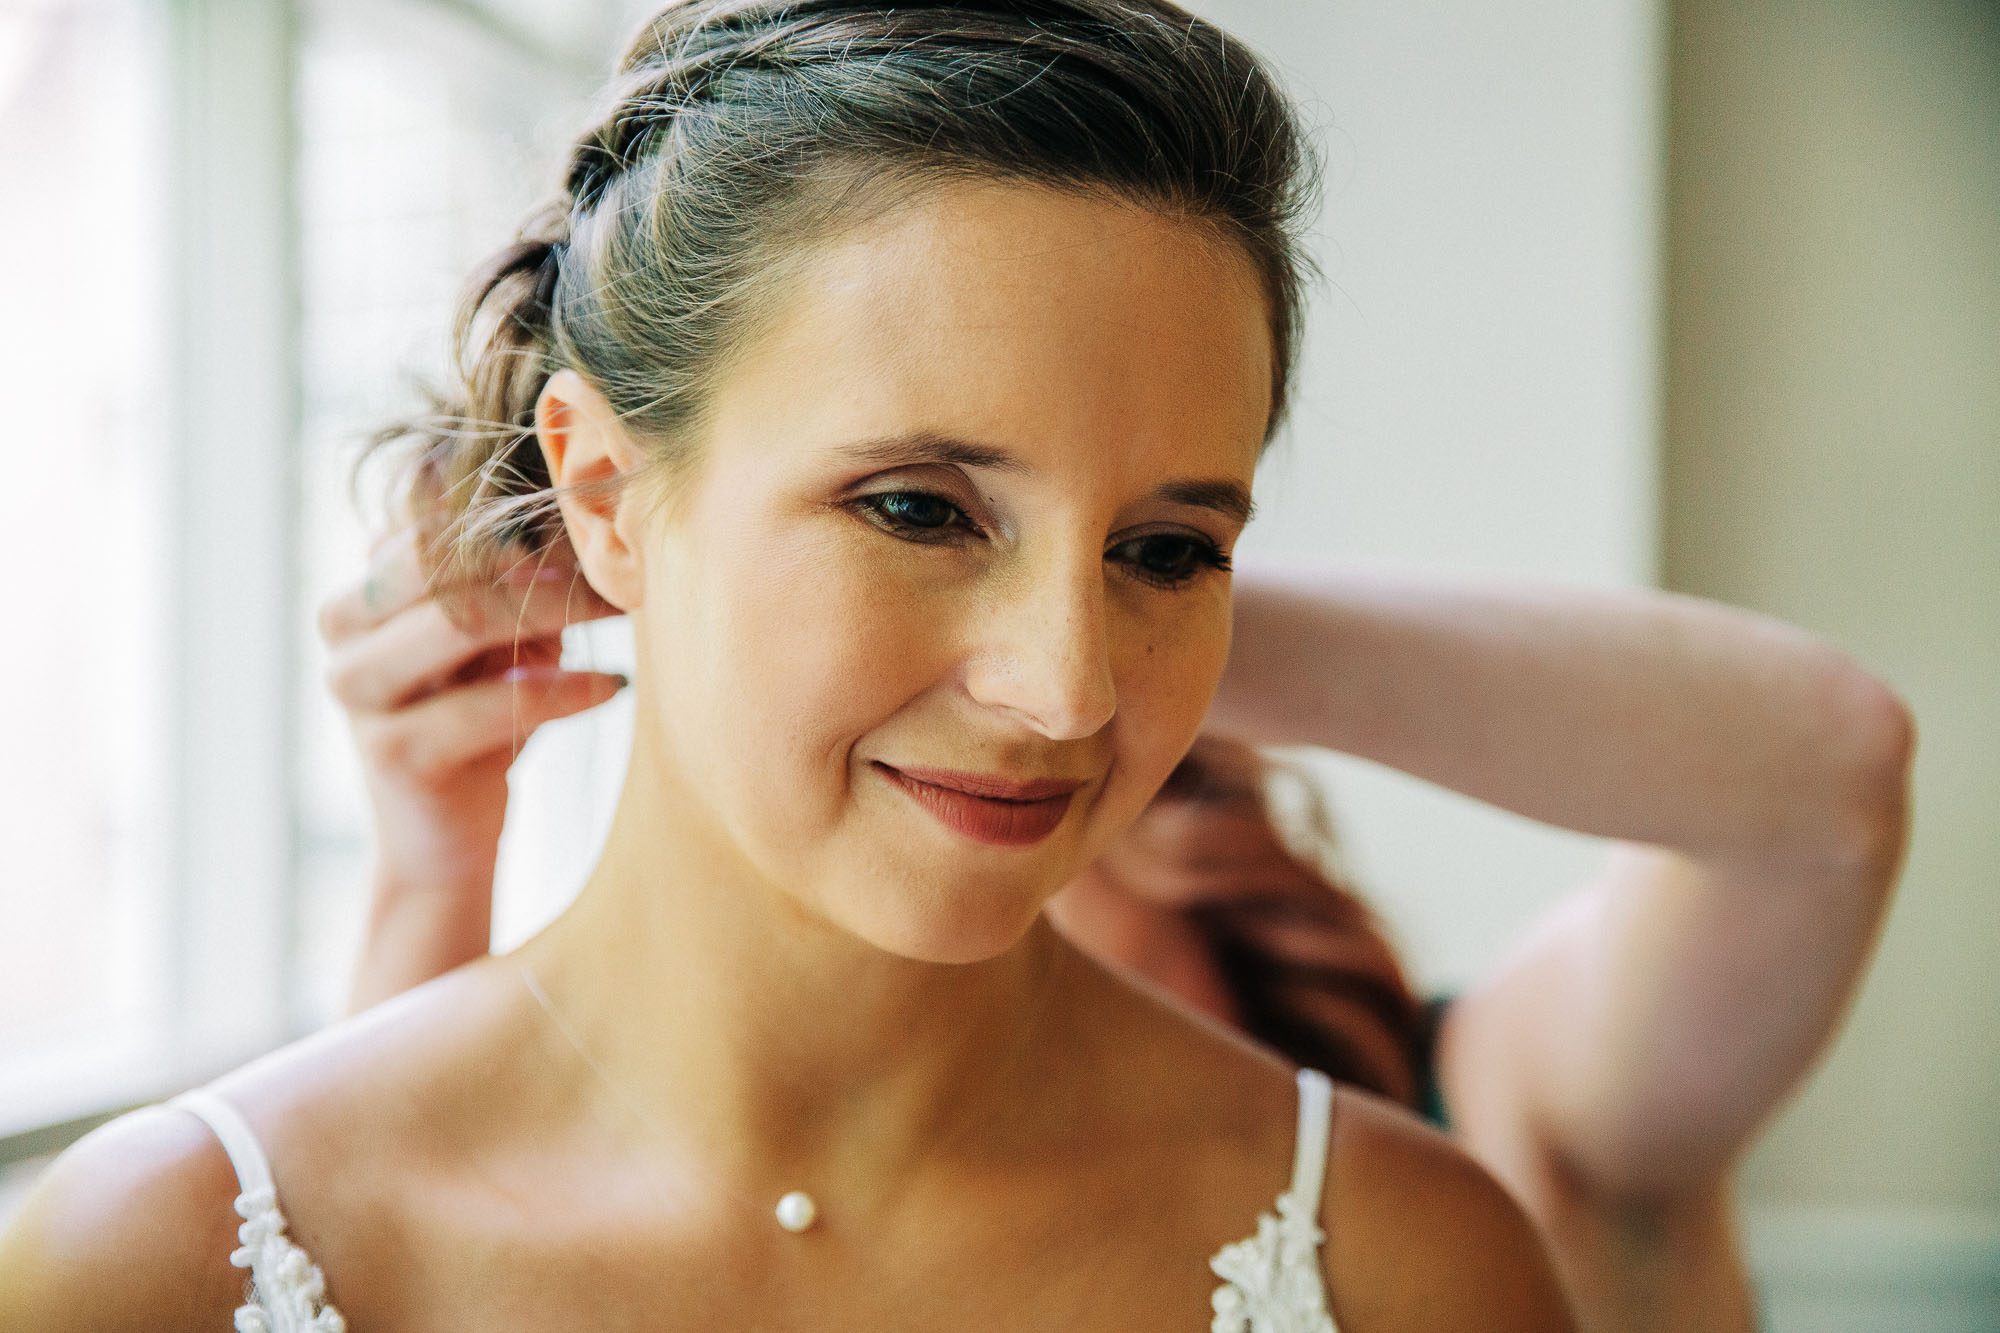 Hey close-up of a bright thoughtful face as her friends help her get dressed on her wedding day